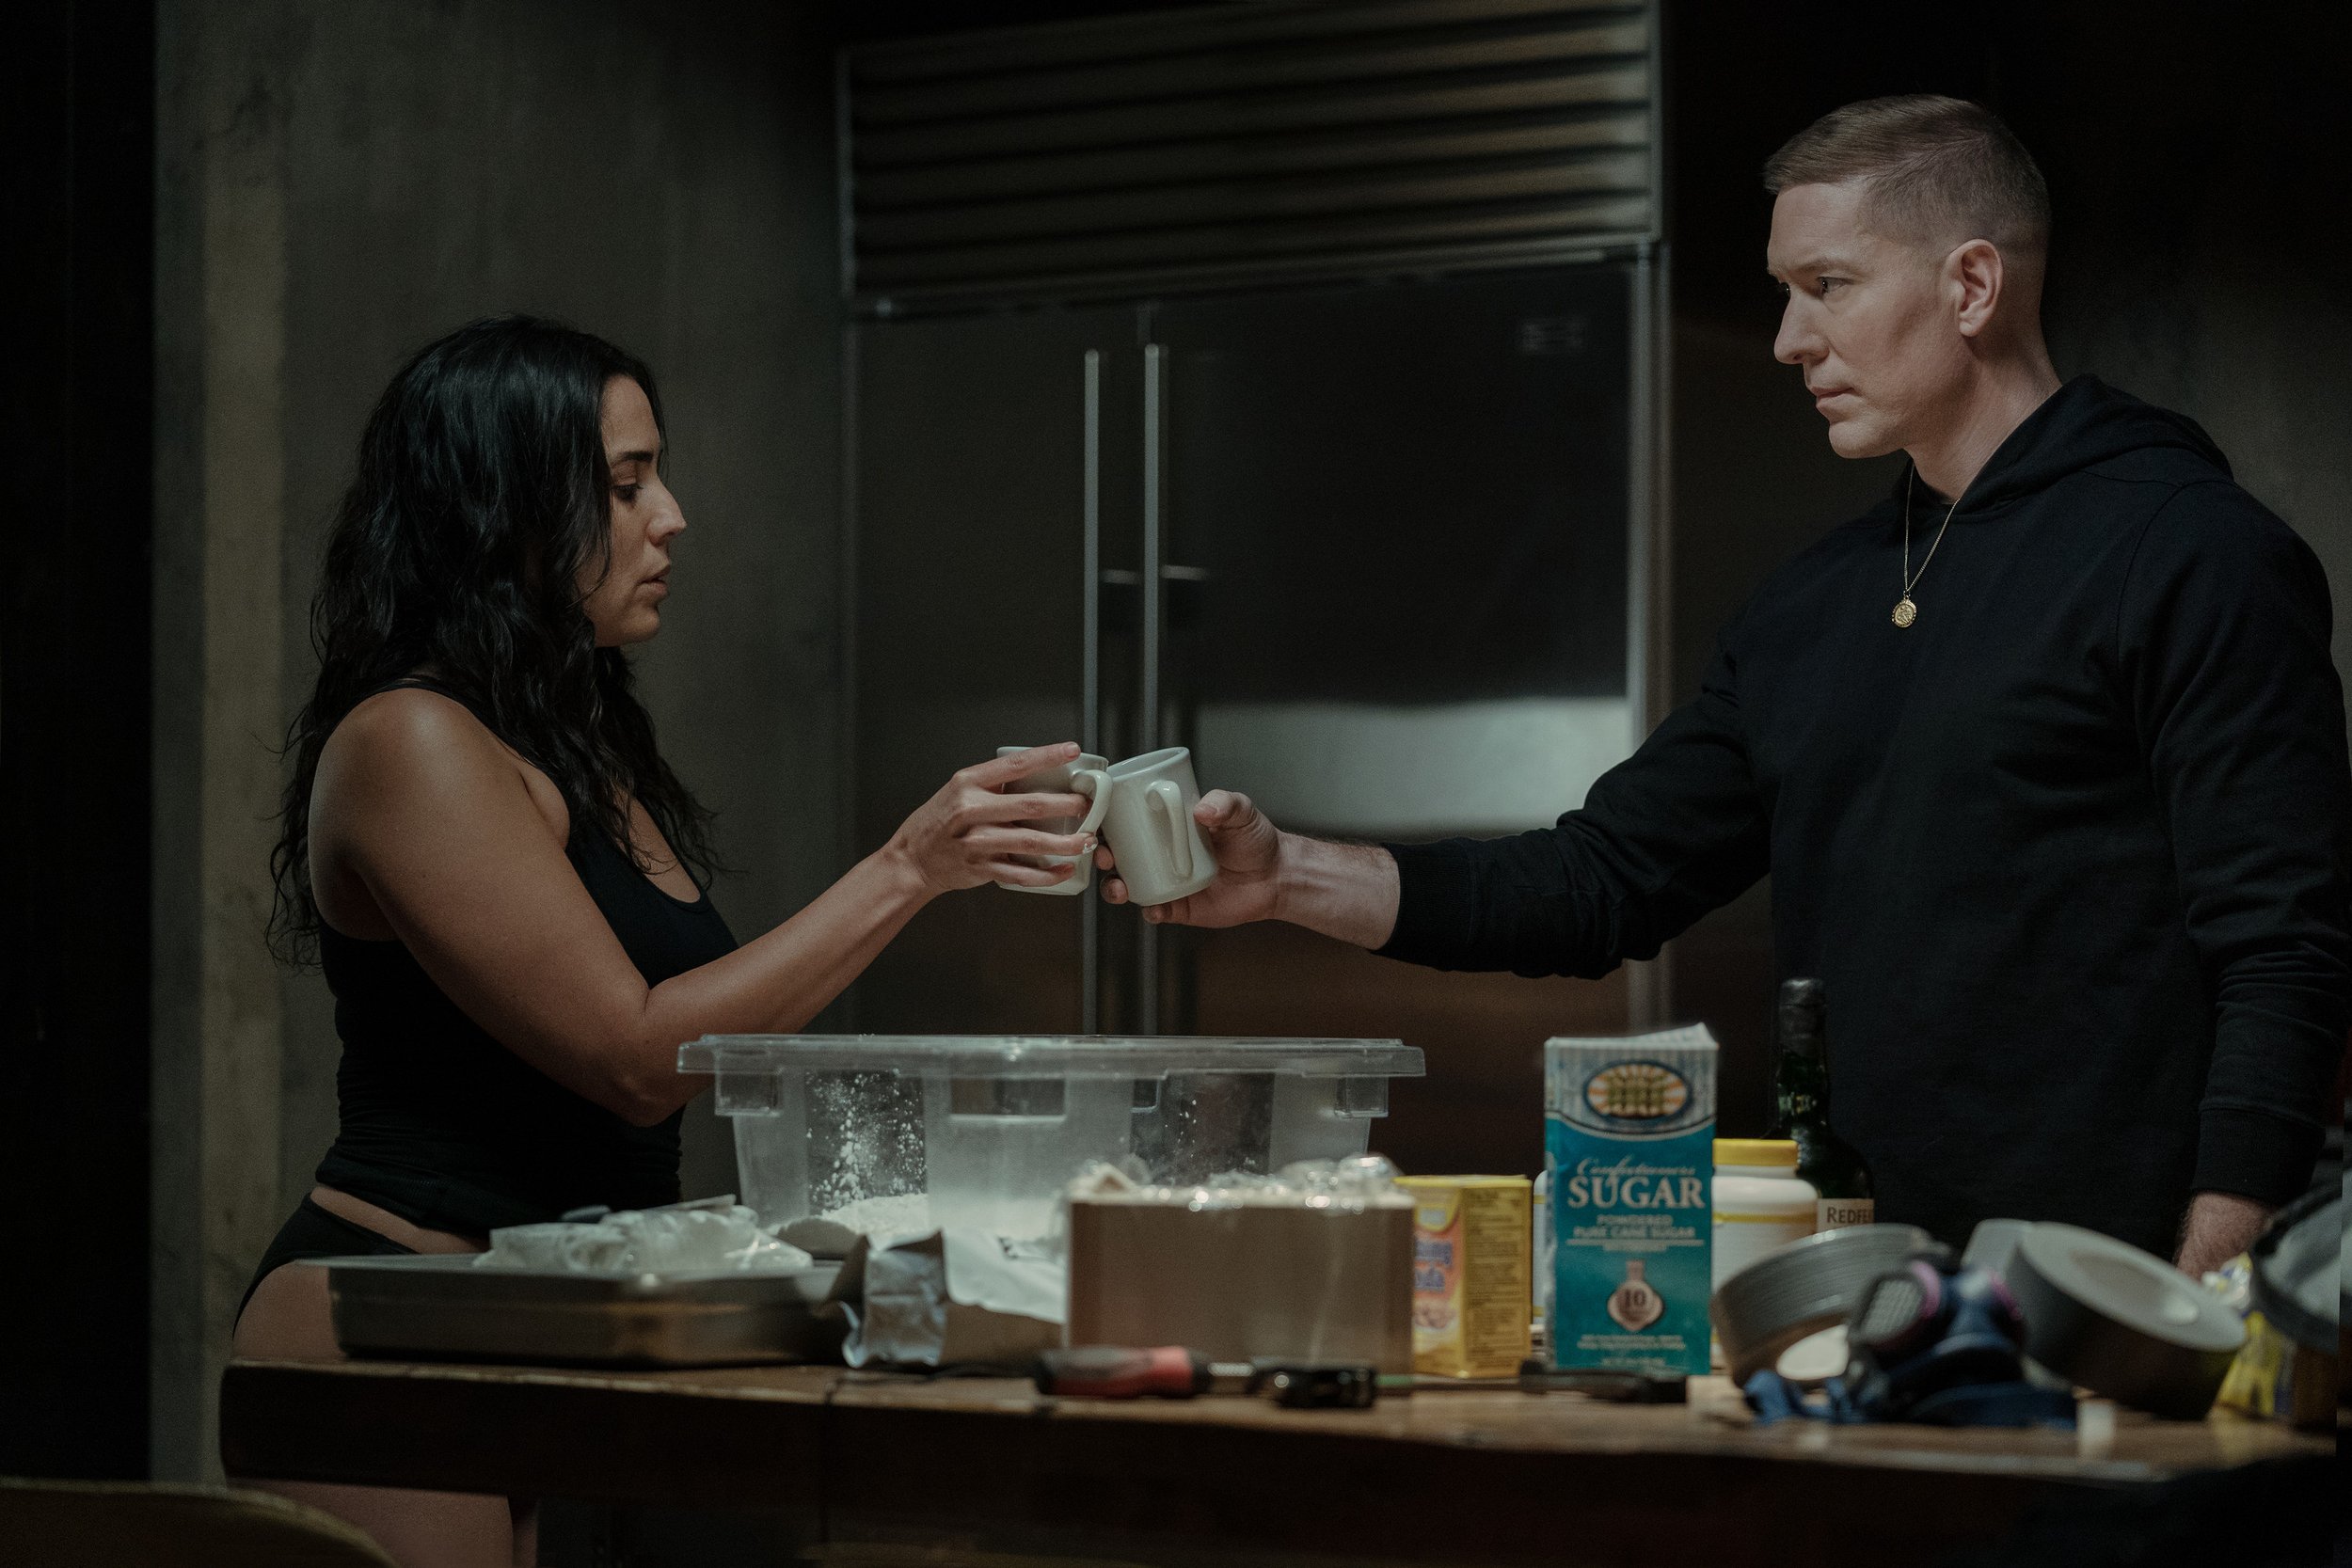 Clip And Photos To Episode 3 Of Power Book IV: Force.